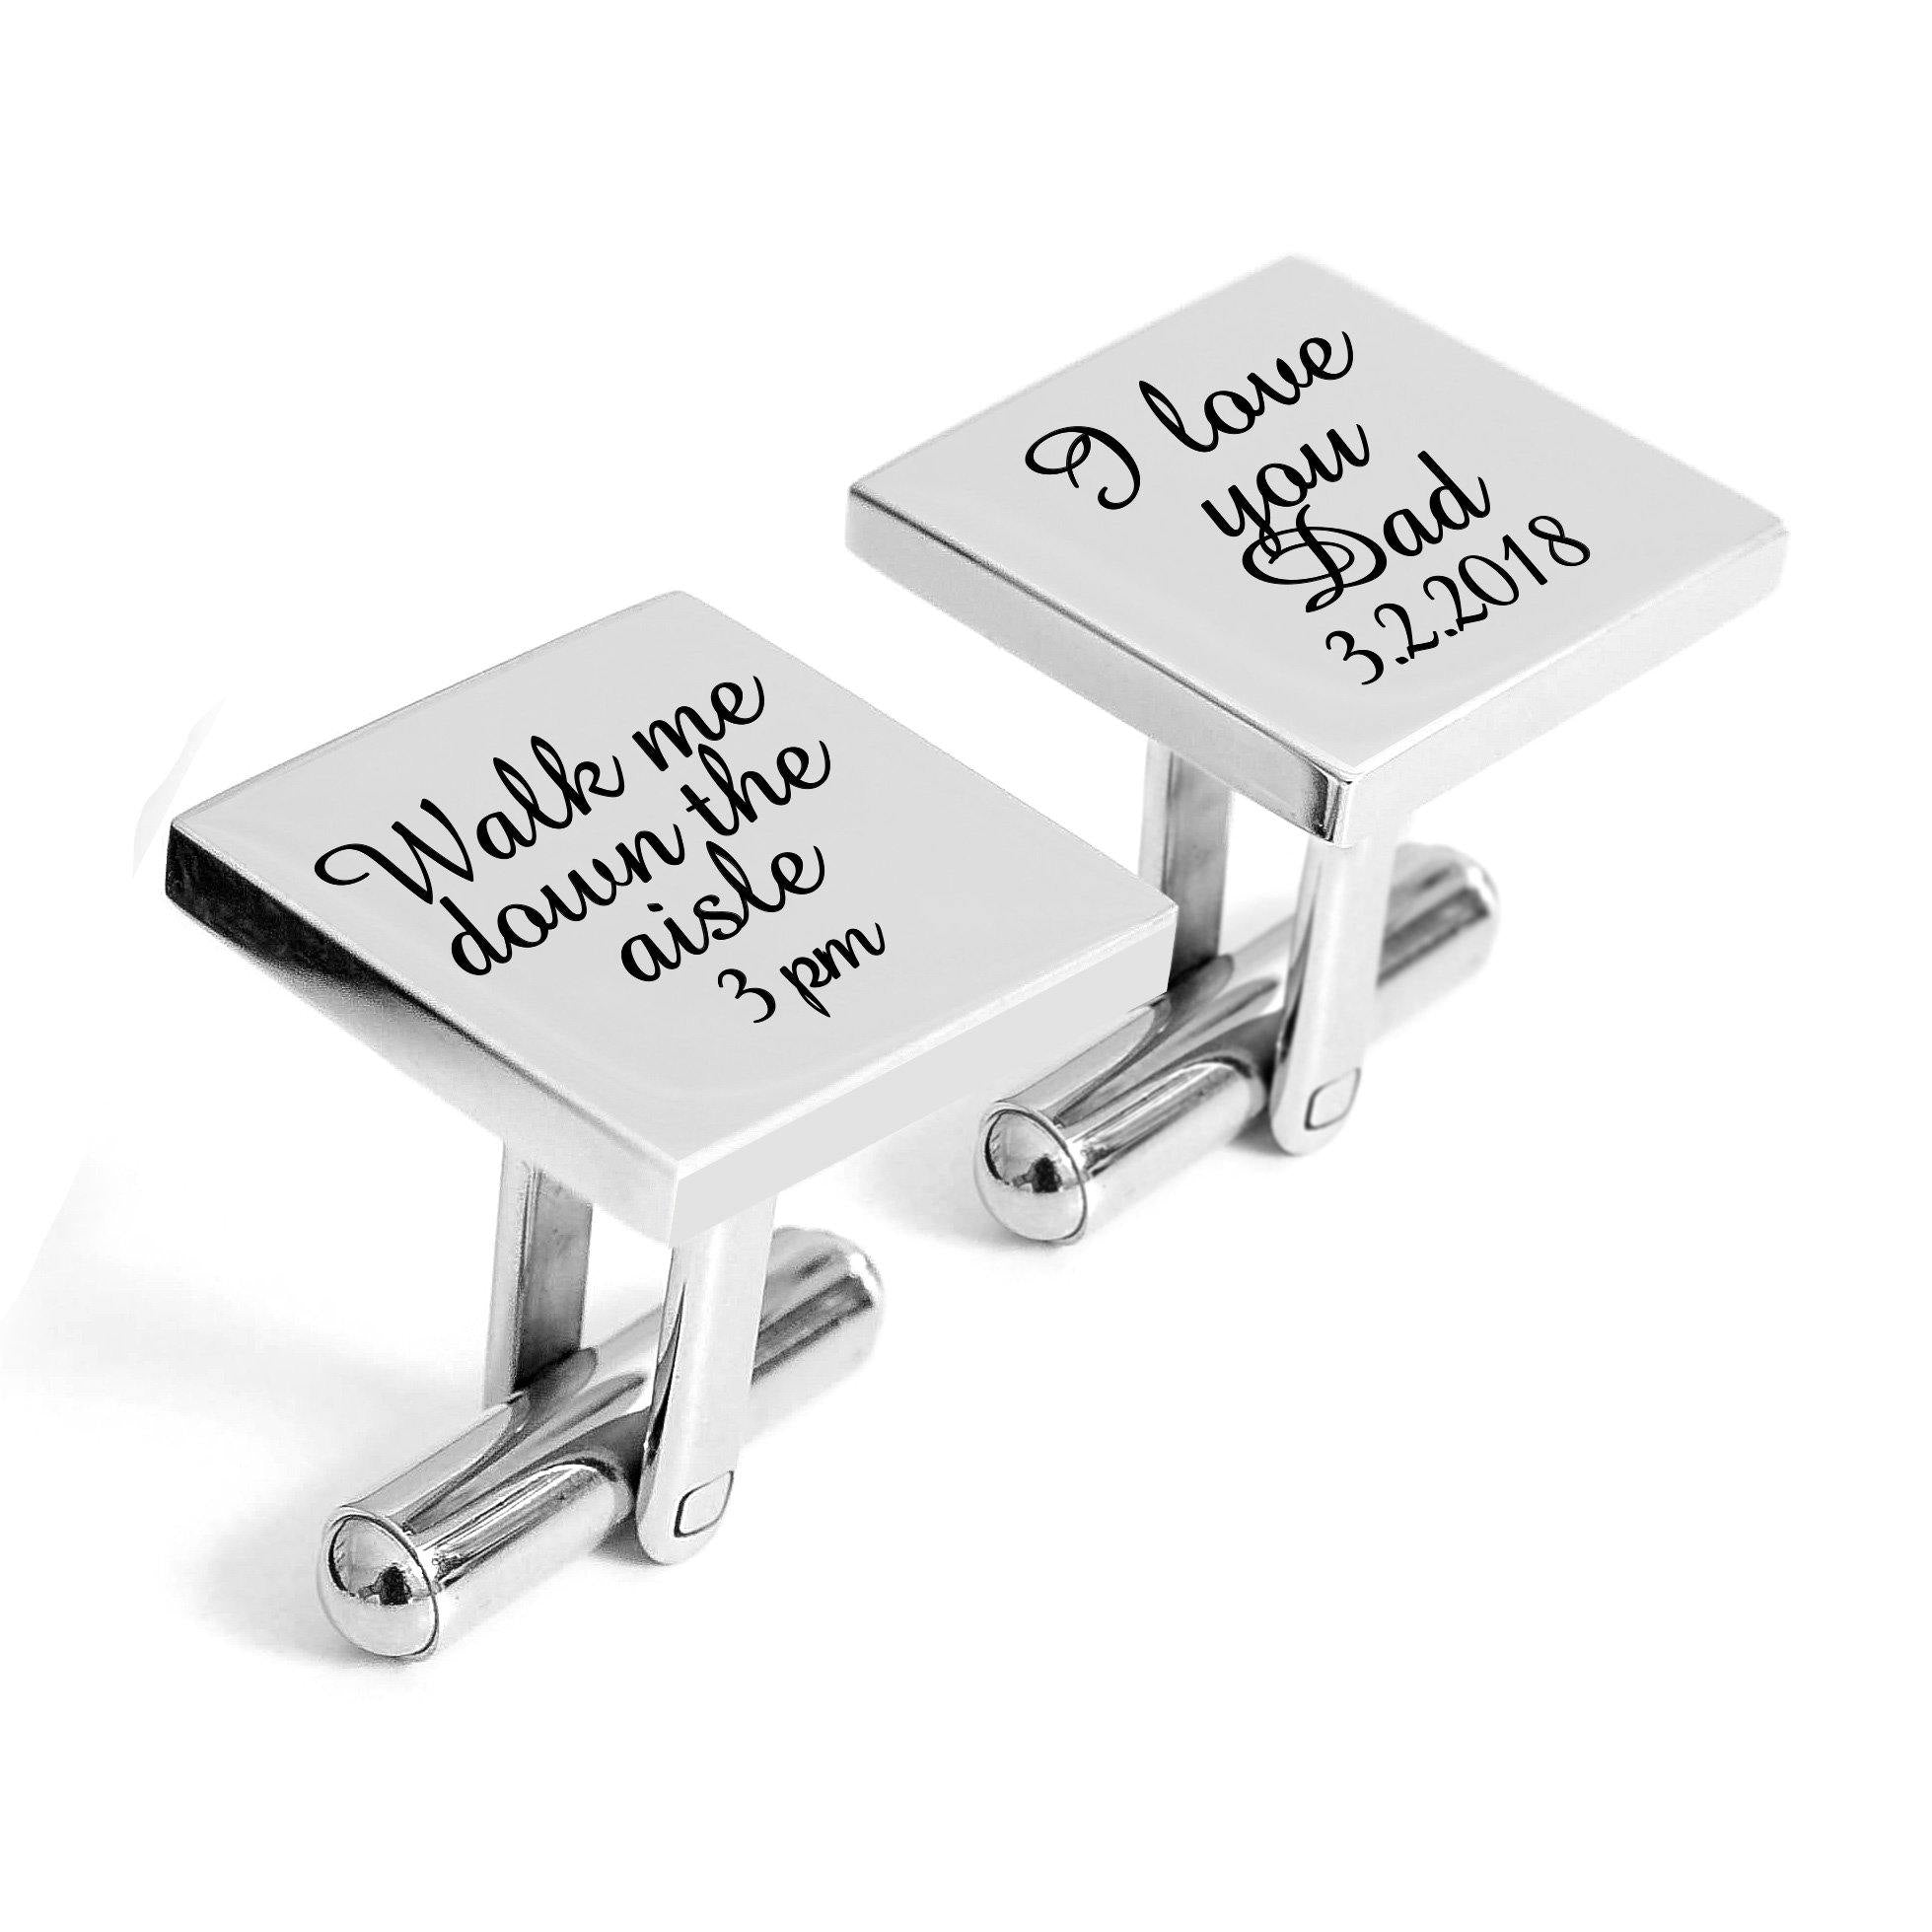 Engraved Father of the Bride cufflinks with date time - Alexa Lane